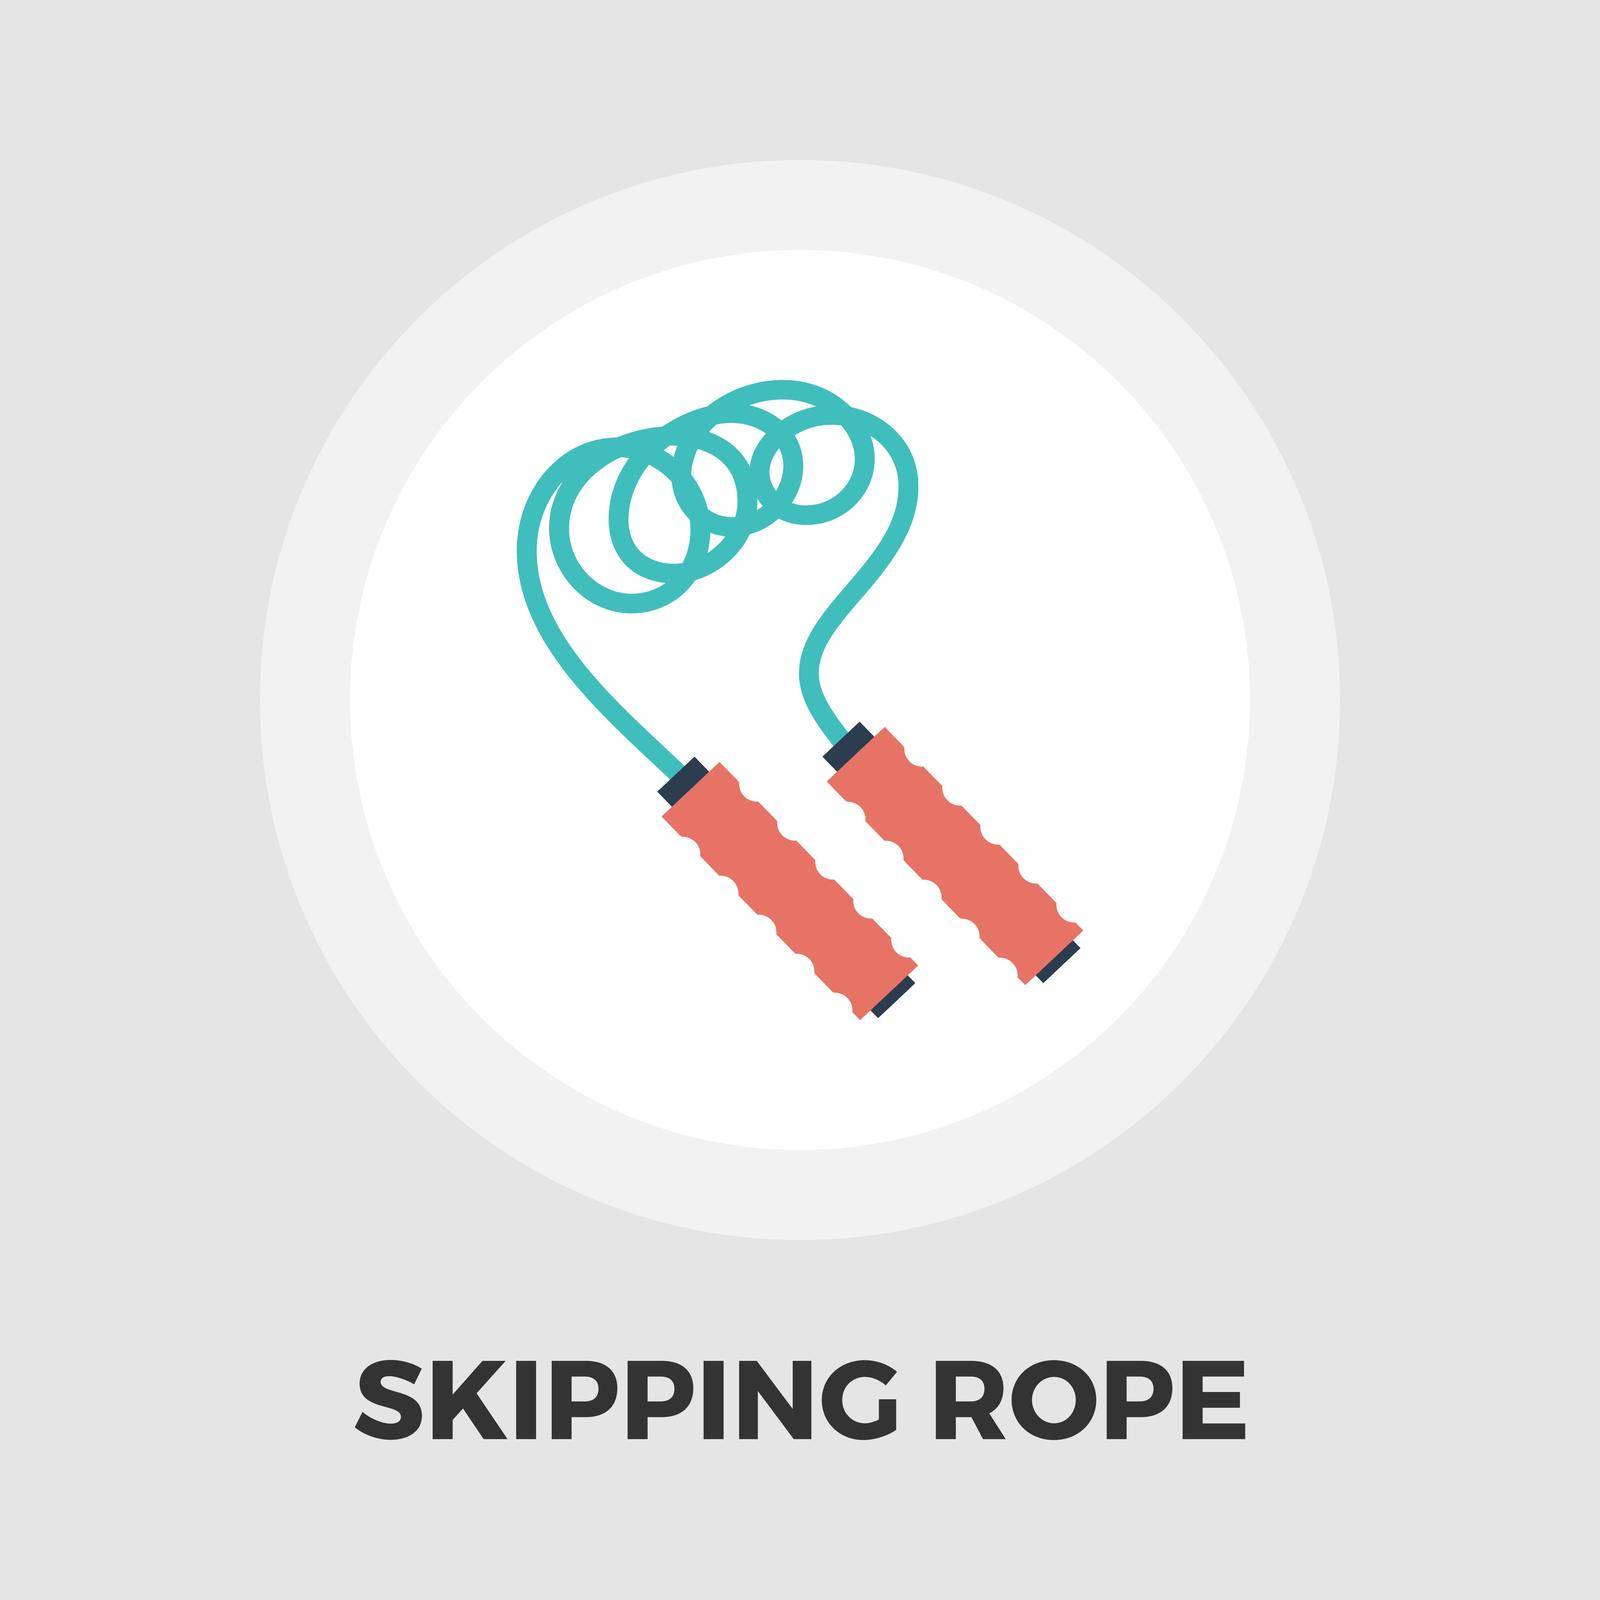 Skipping rope icon vector. Flat icon isolated on the white background. Editable EPS file. Vector illustration.